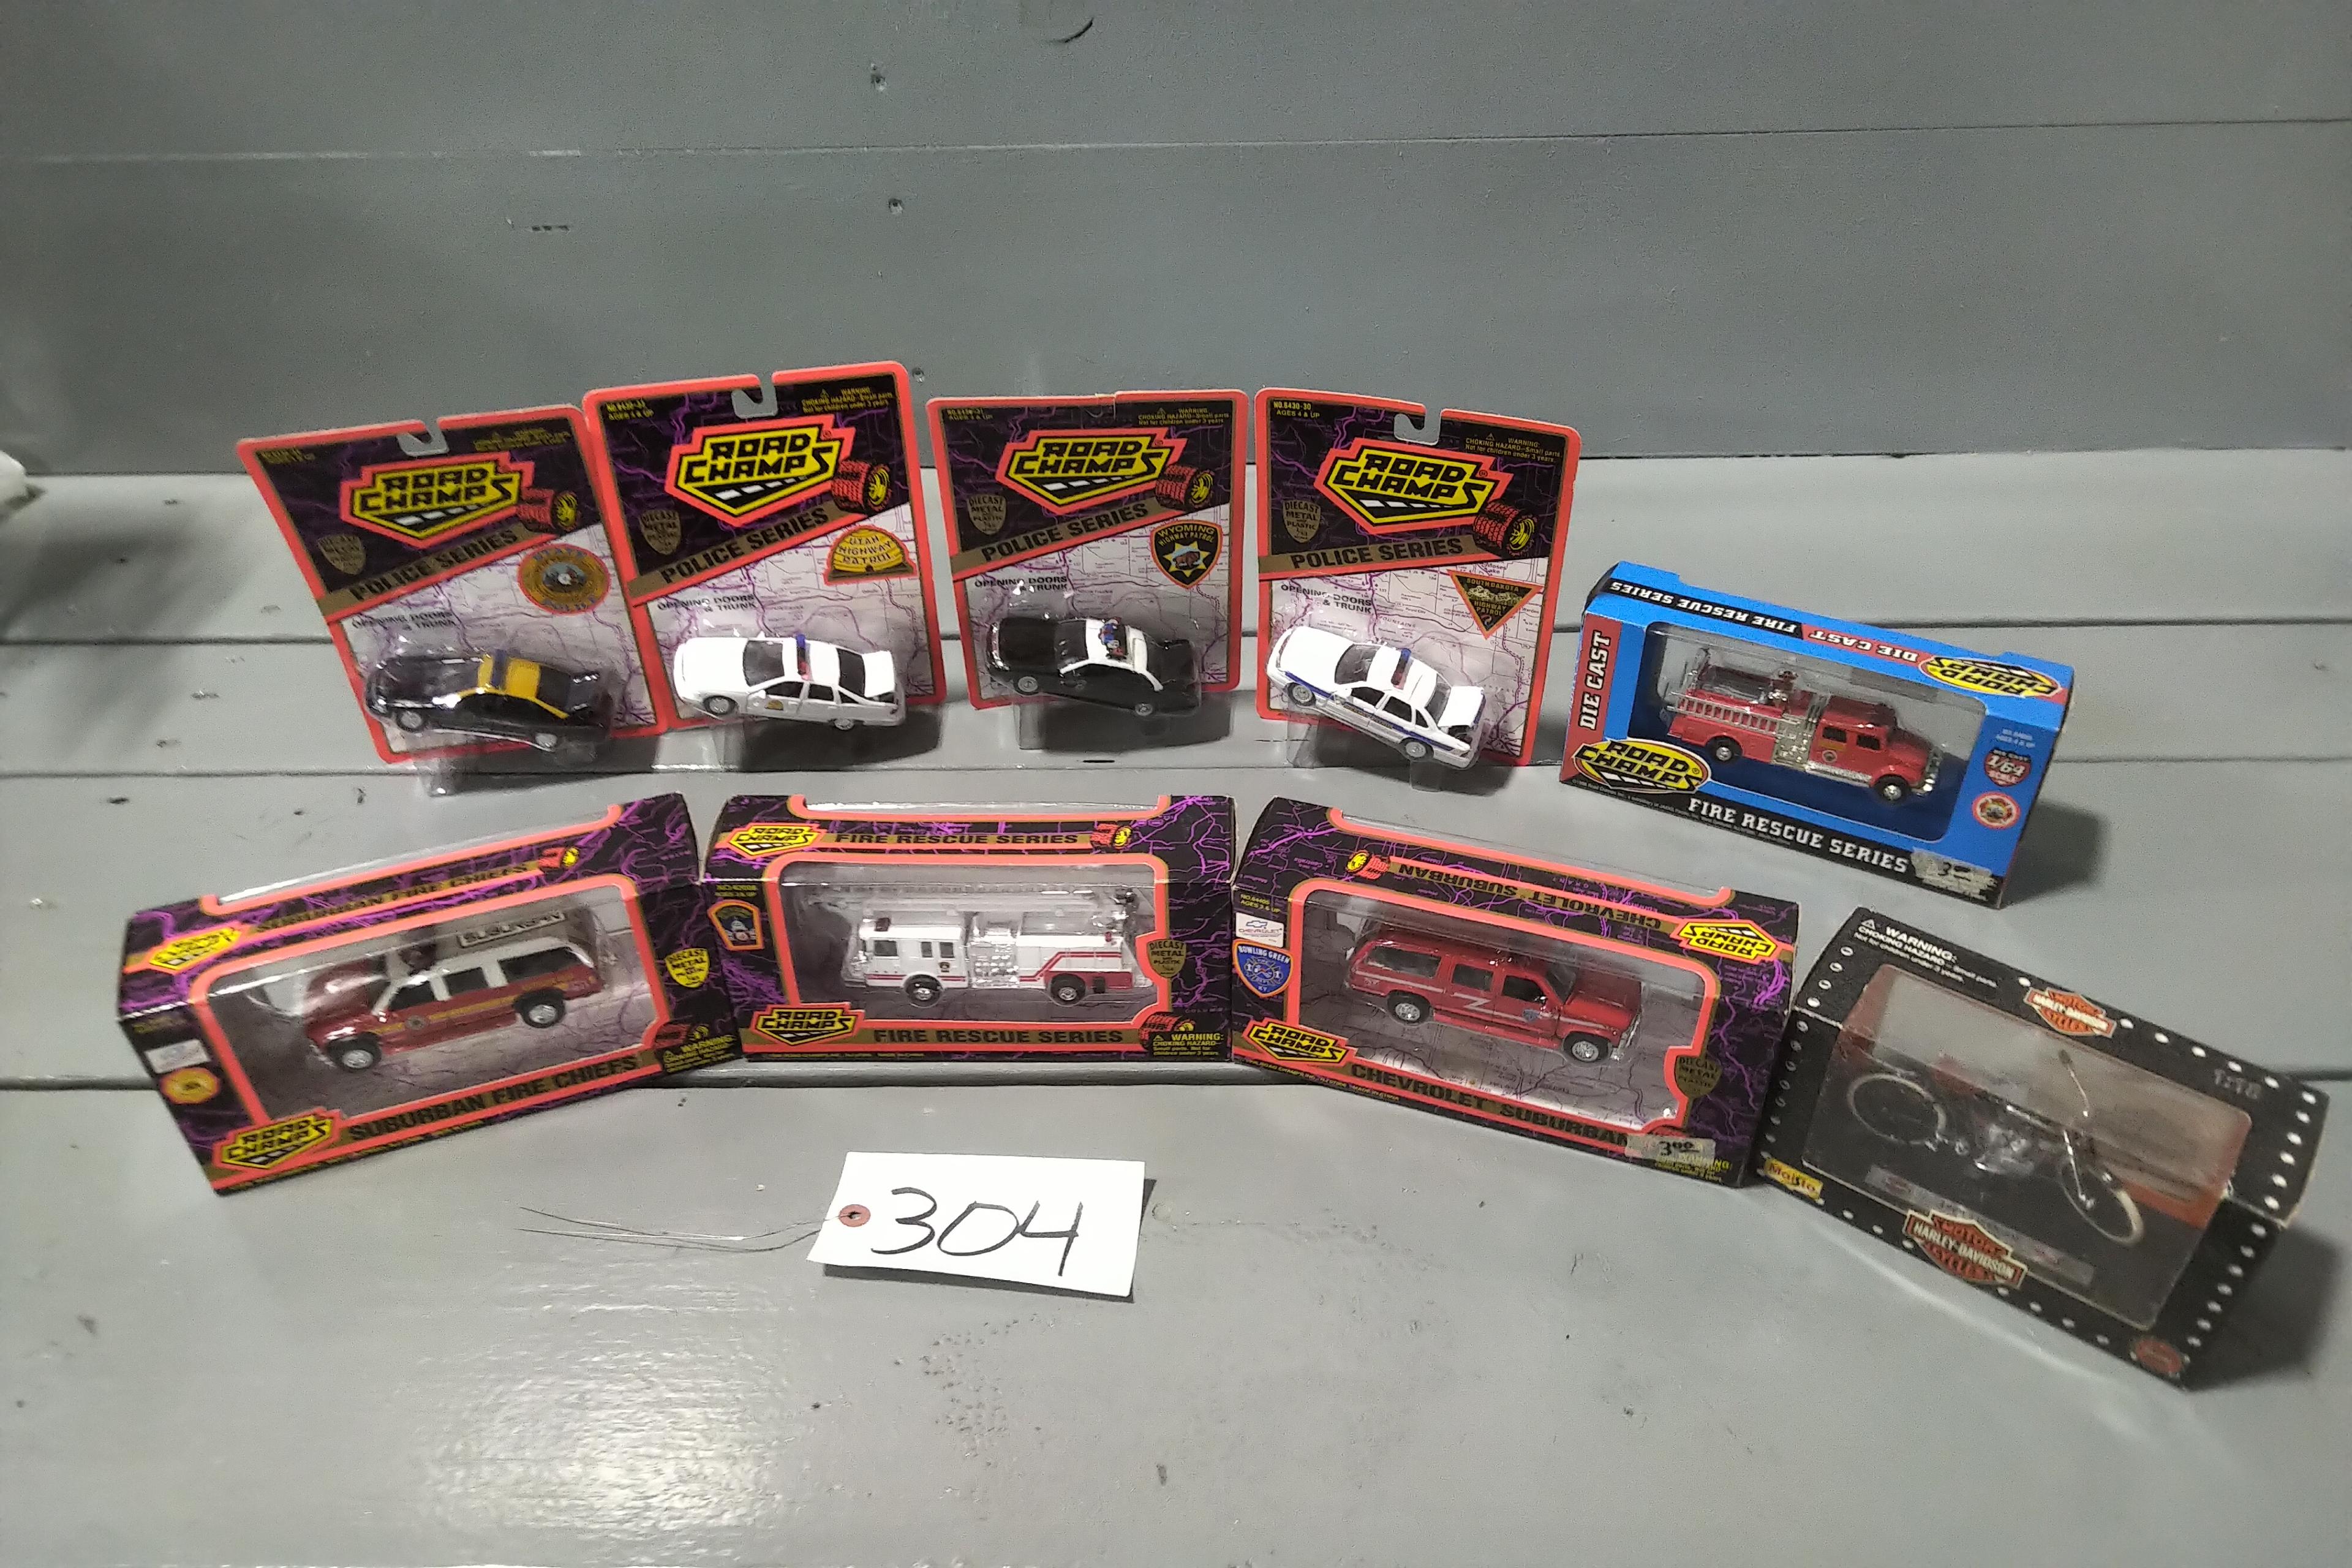 4 - 1/43 SCALE ROAD CHAMPS CARS NEW IN BOX, 4 - 1/43 SCALE ROAD CHAMP POLICE SERIES